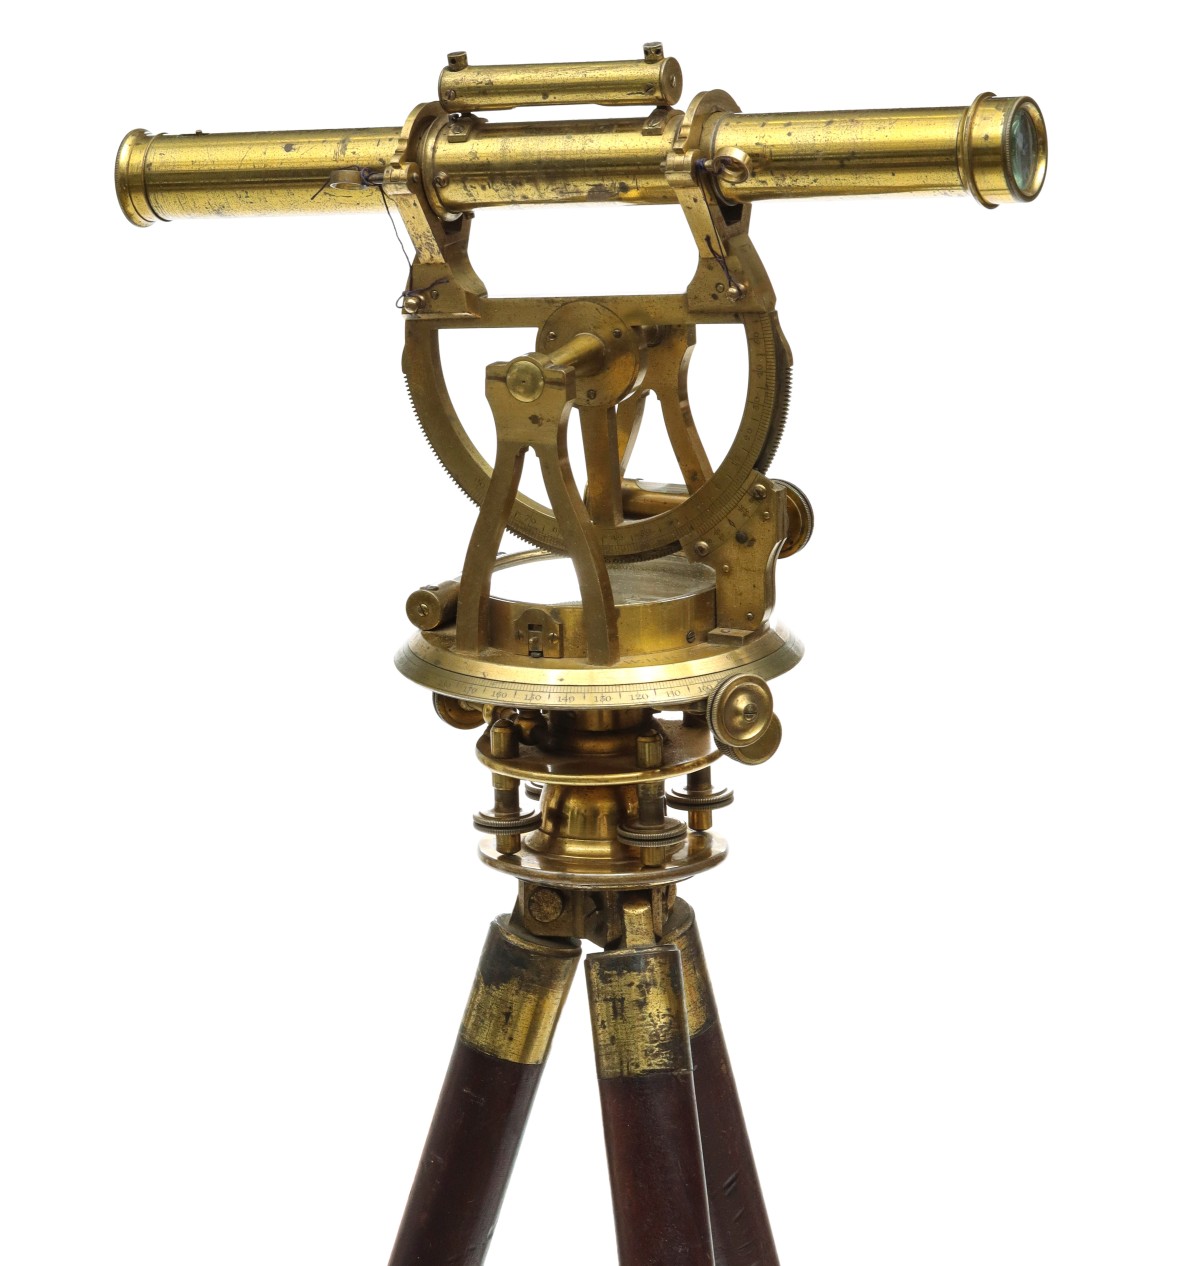 AN EARLY 19TH C. THEODOLITE OUTFIT ON TRIPOD